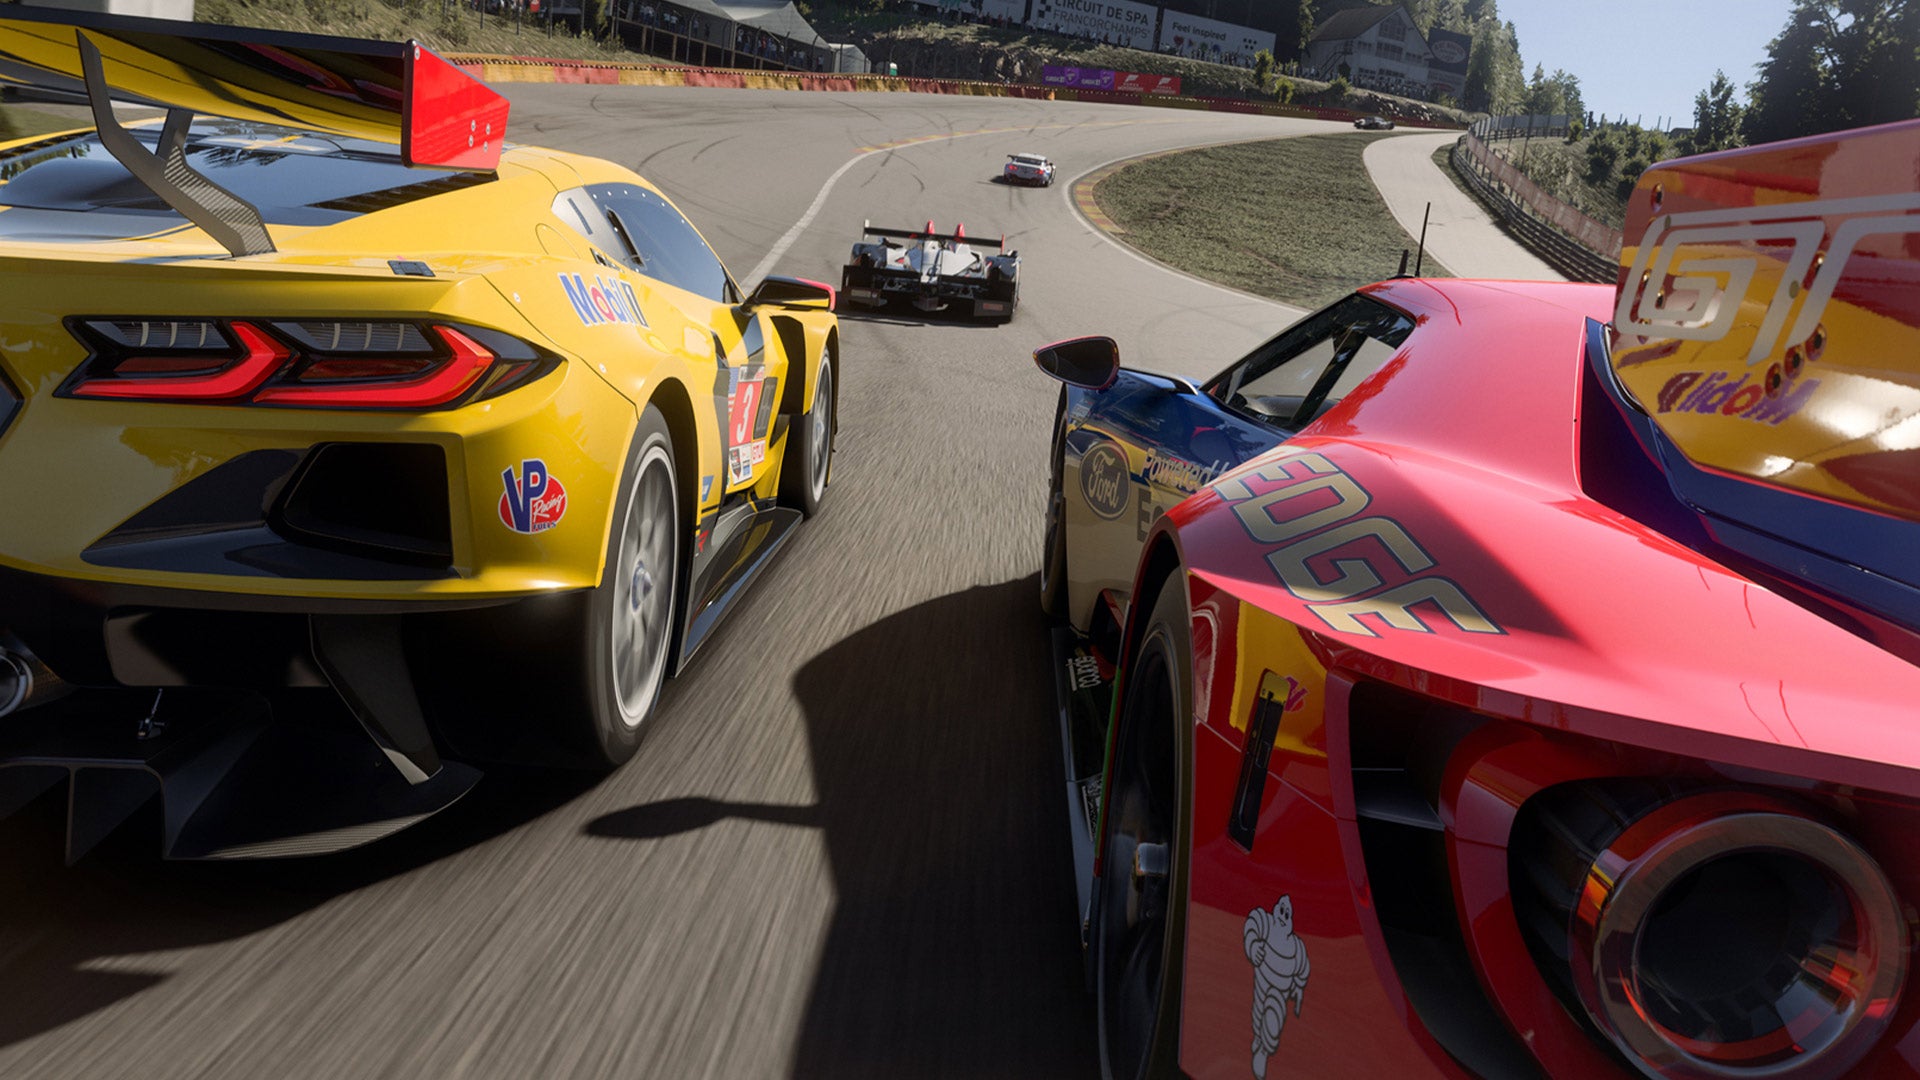 The next update for Forza Motorsport, coming this week, will adjust the "Safety Rating"